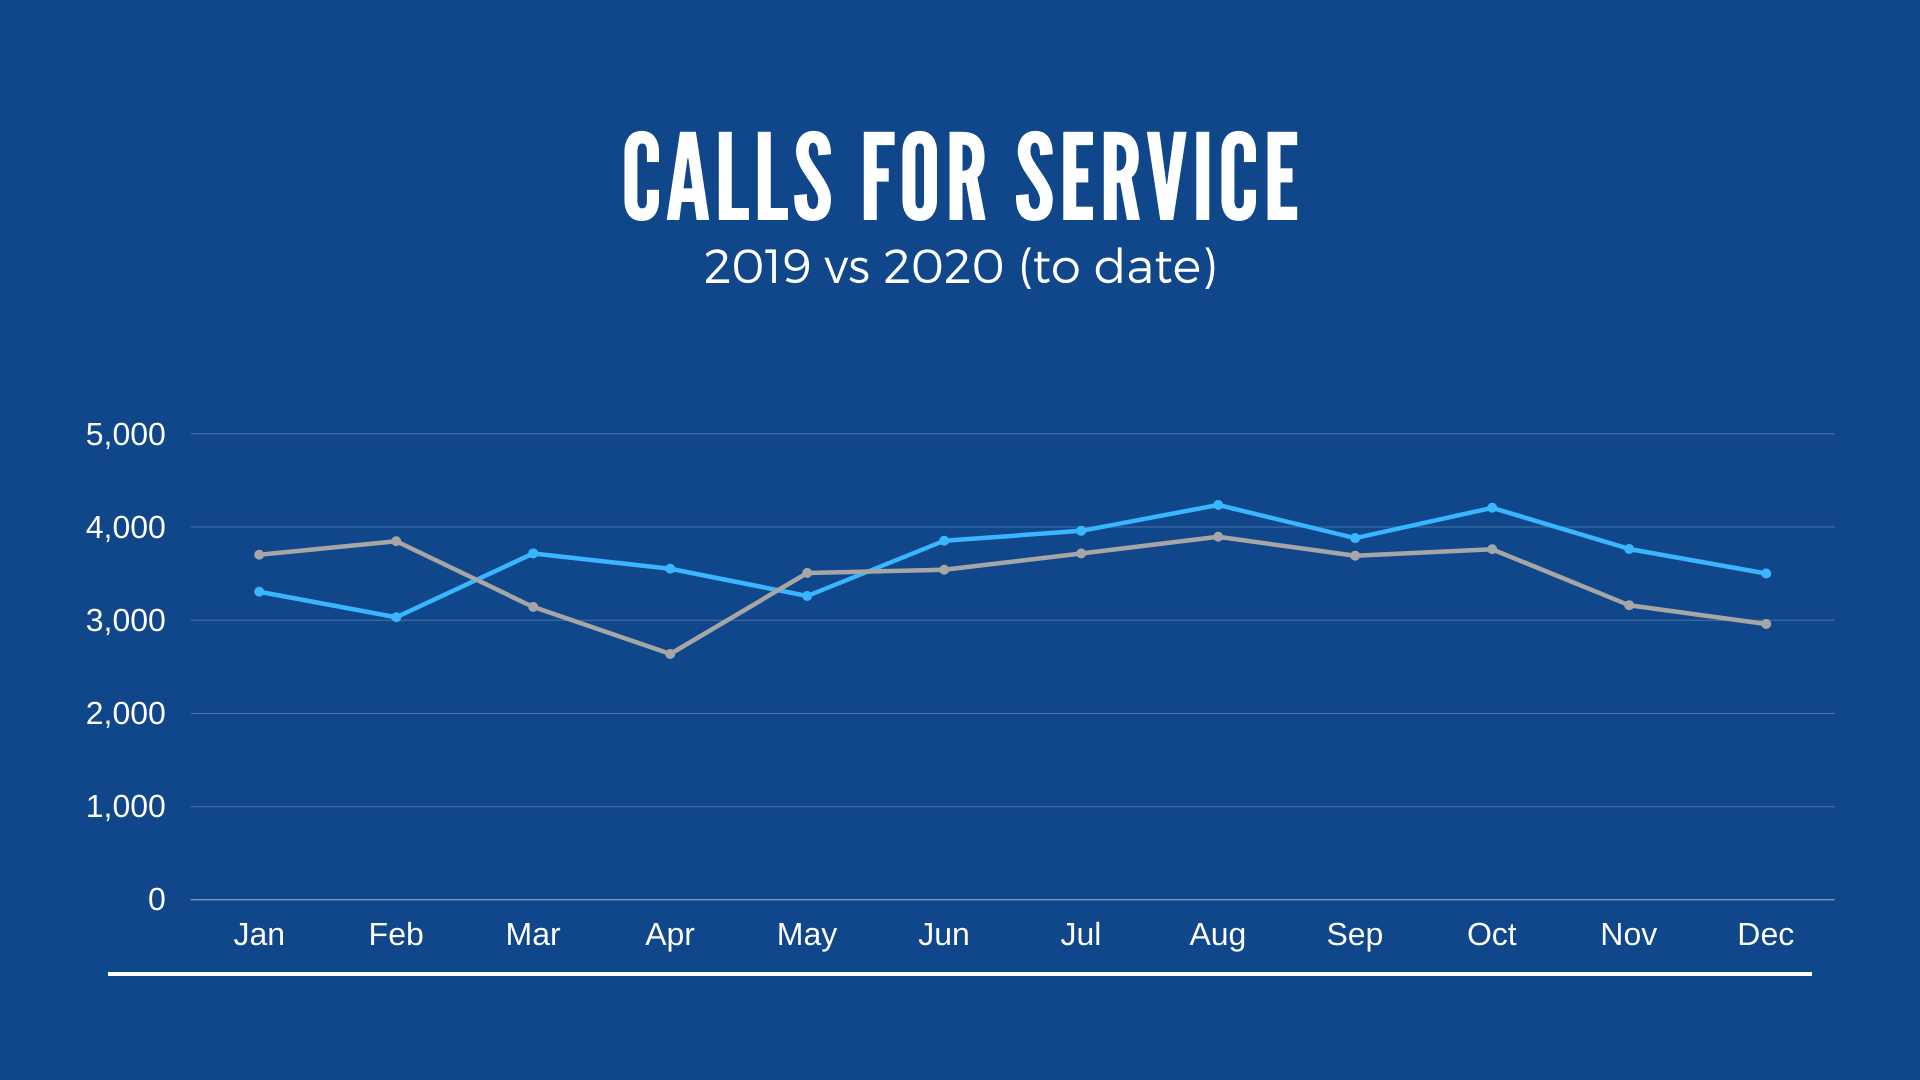 Chart displaying calls for service in 2019 versus 2020